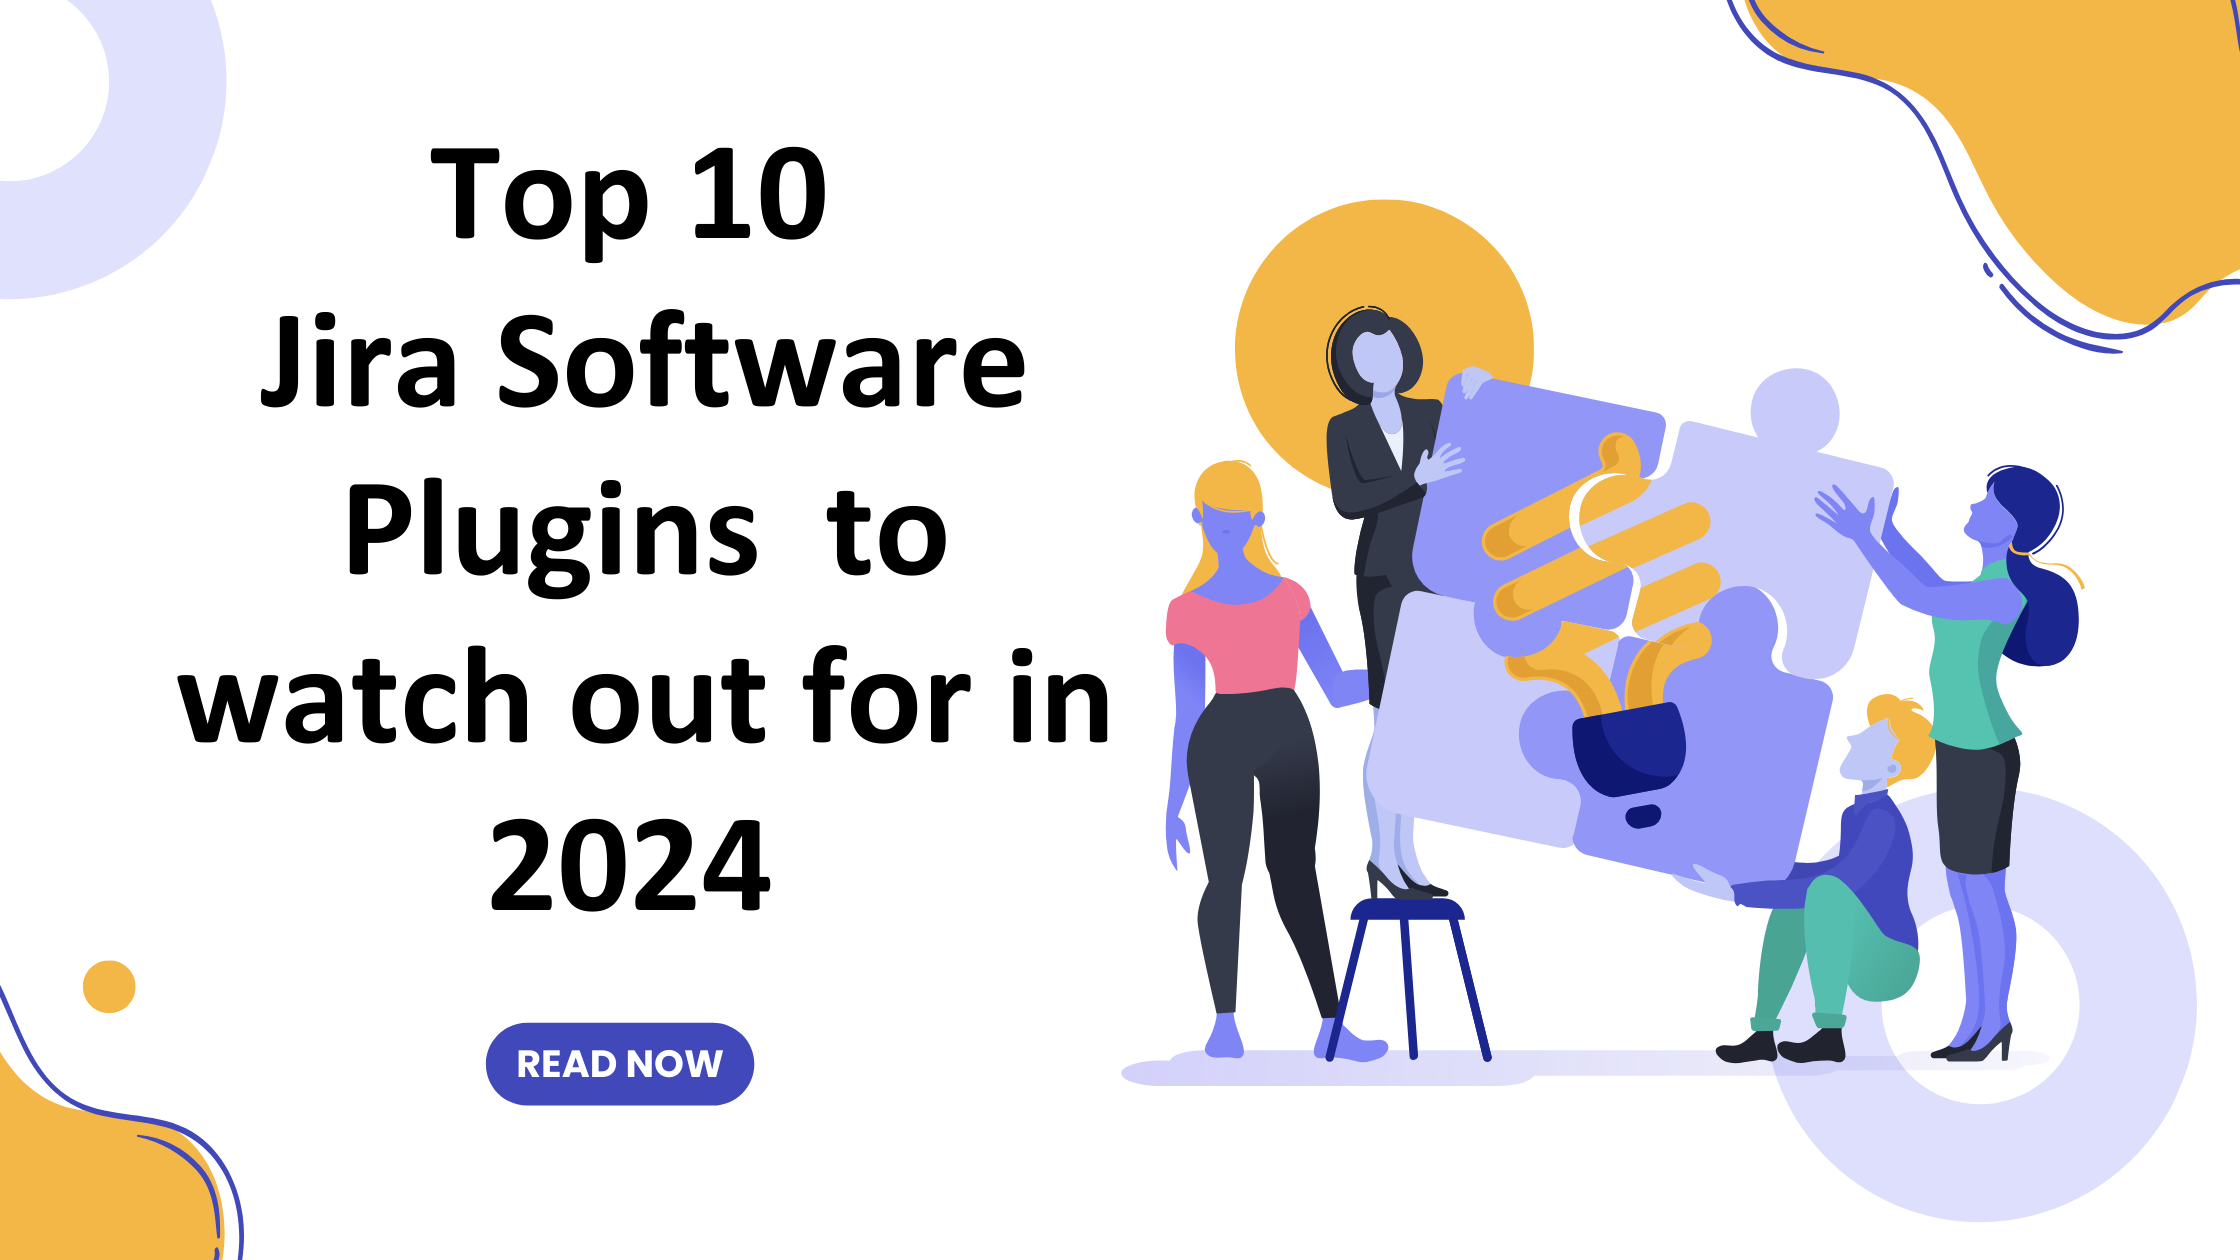 Top 10 Jira Software Plugins to Supercharge Your Workflow in 2024 